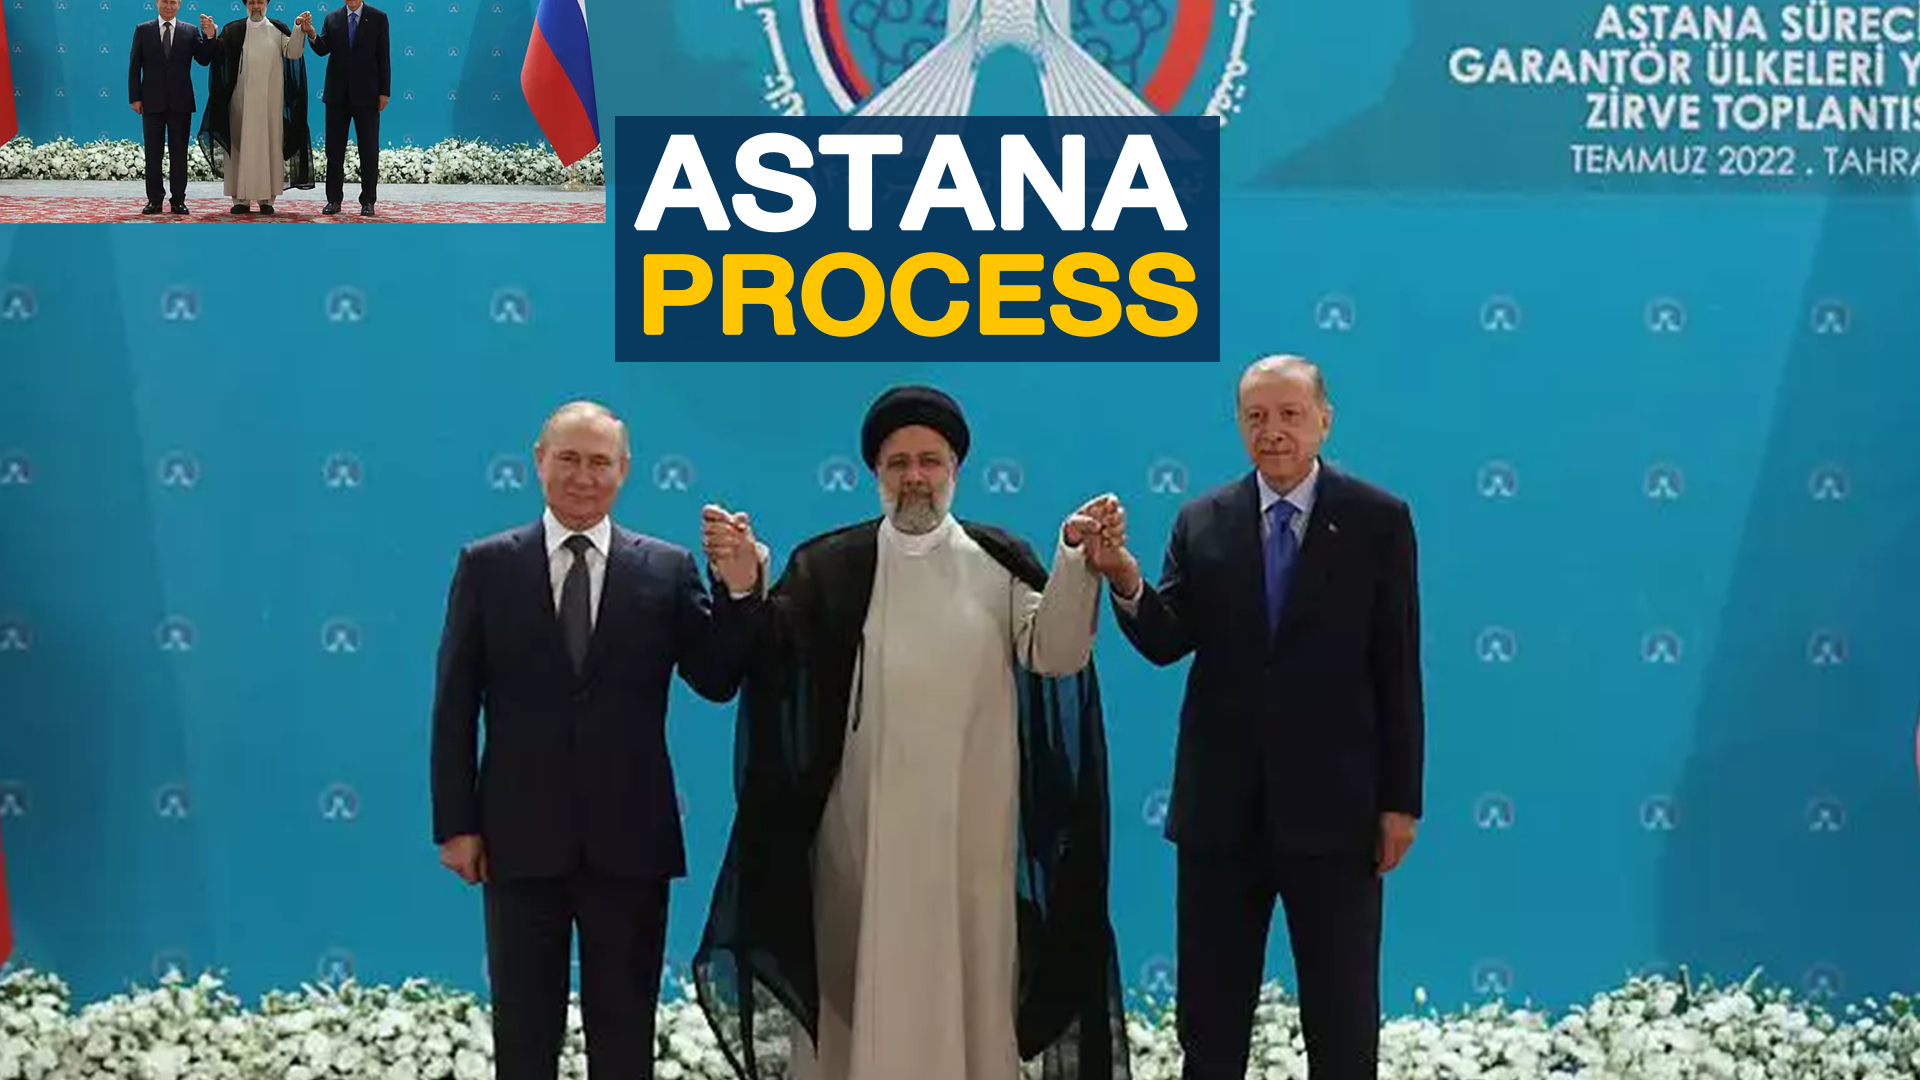 Astana process: Preventing Turkey from attacking Syria